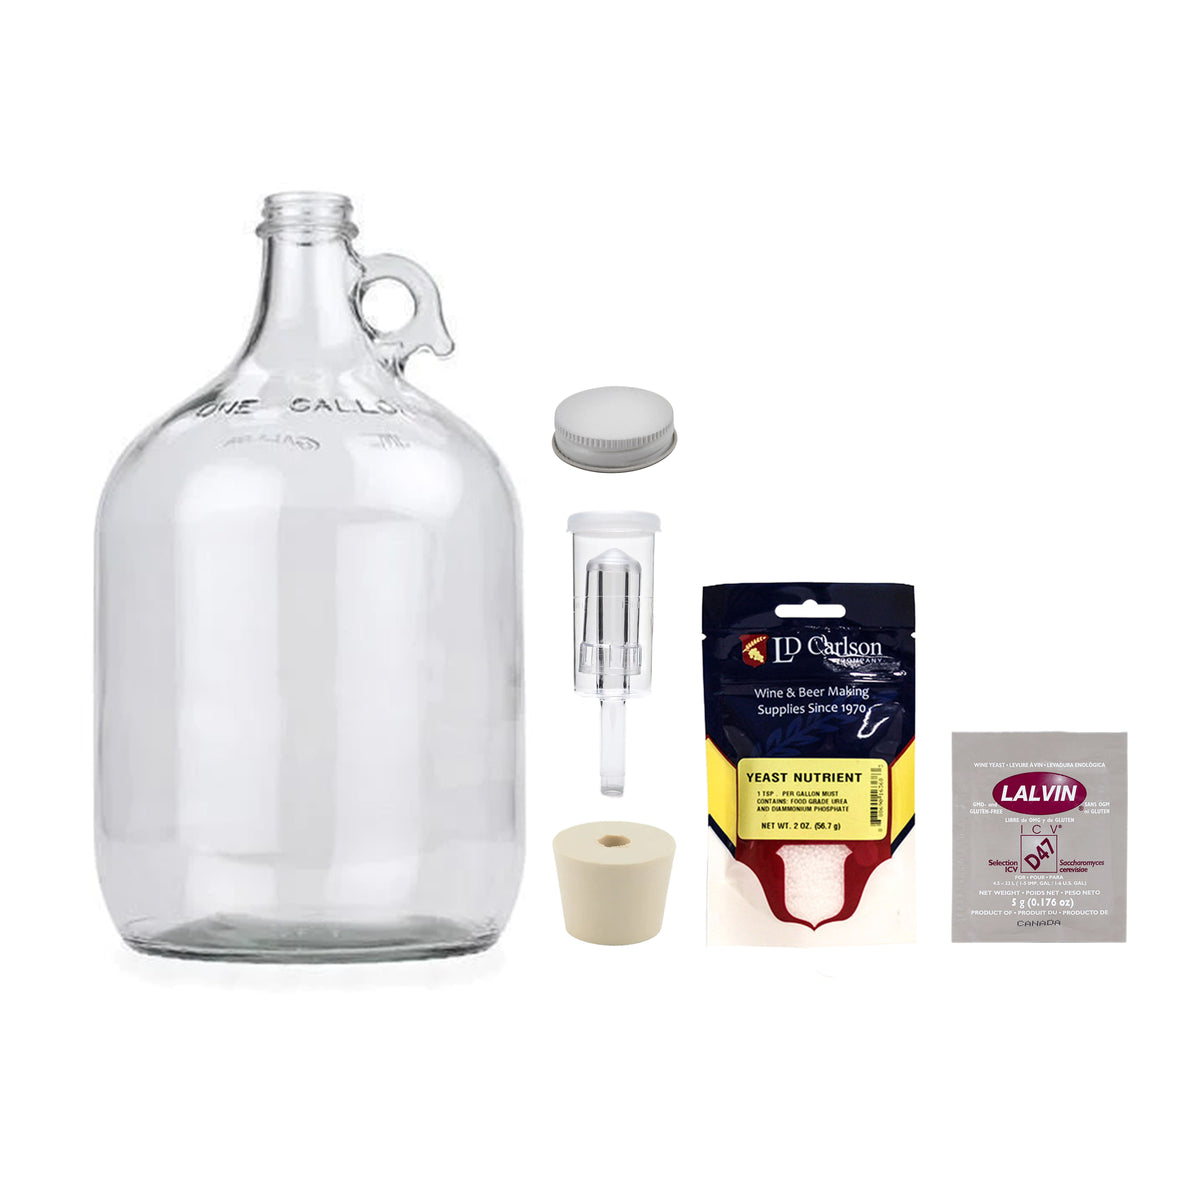 Make Your Own Mead Kit